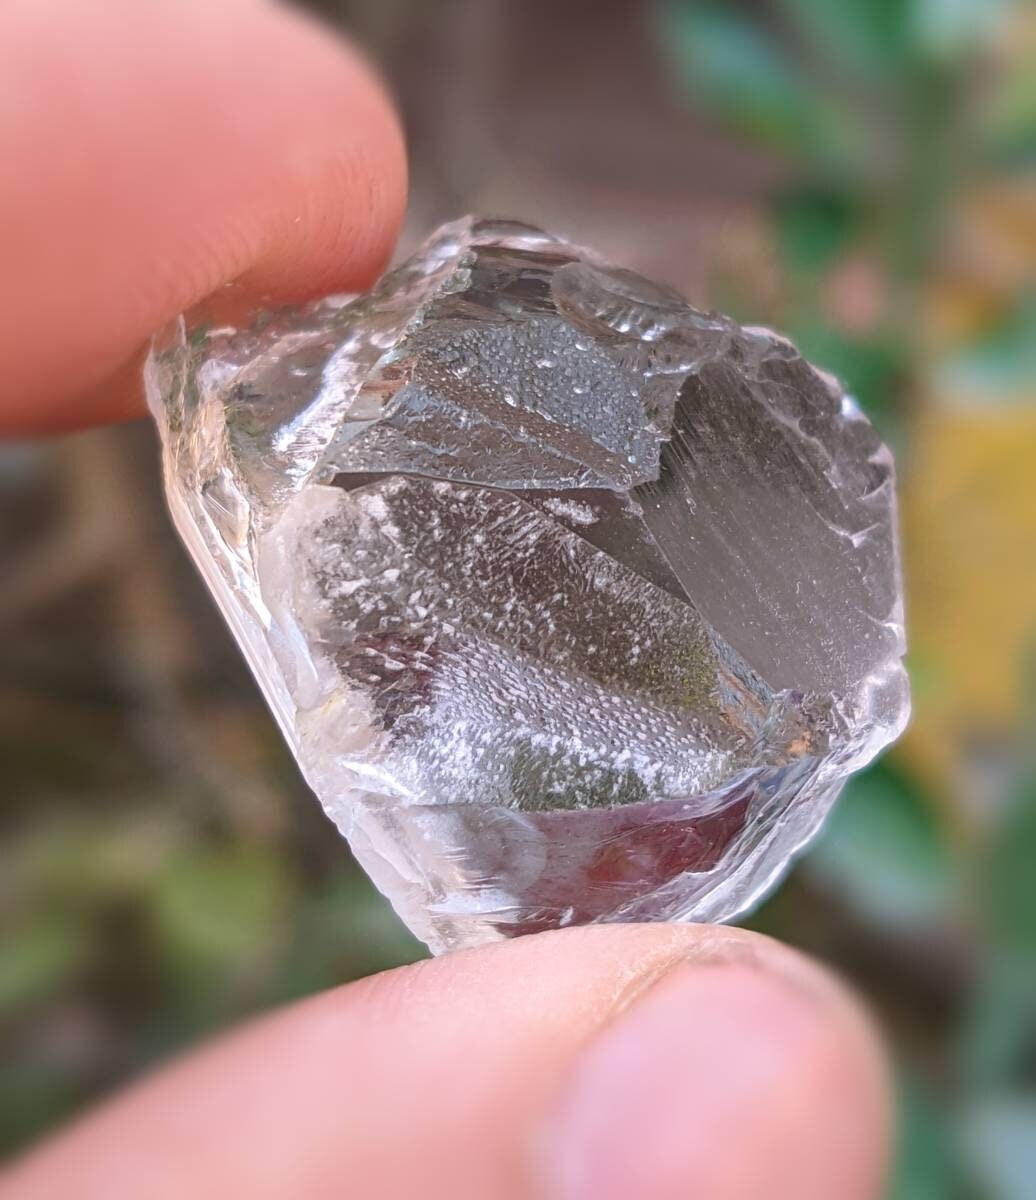 ARSAA GEMS AND MINERALSNatural fine quality beautiful 10.5 grams cutting grade clear quartz crystal - Premium  from ARSAA GEMS AND MINERALS - Just $20.00! Shop now at ARSAA GEMS AND MINERALS